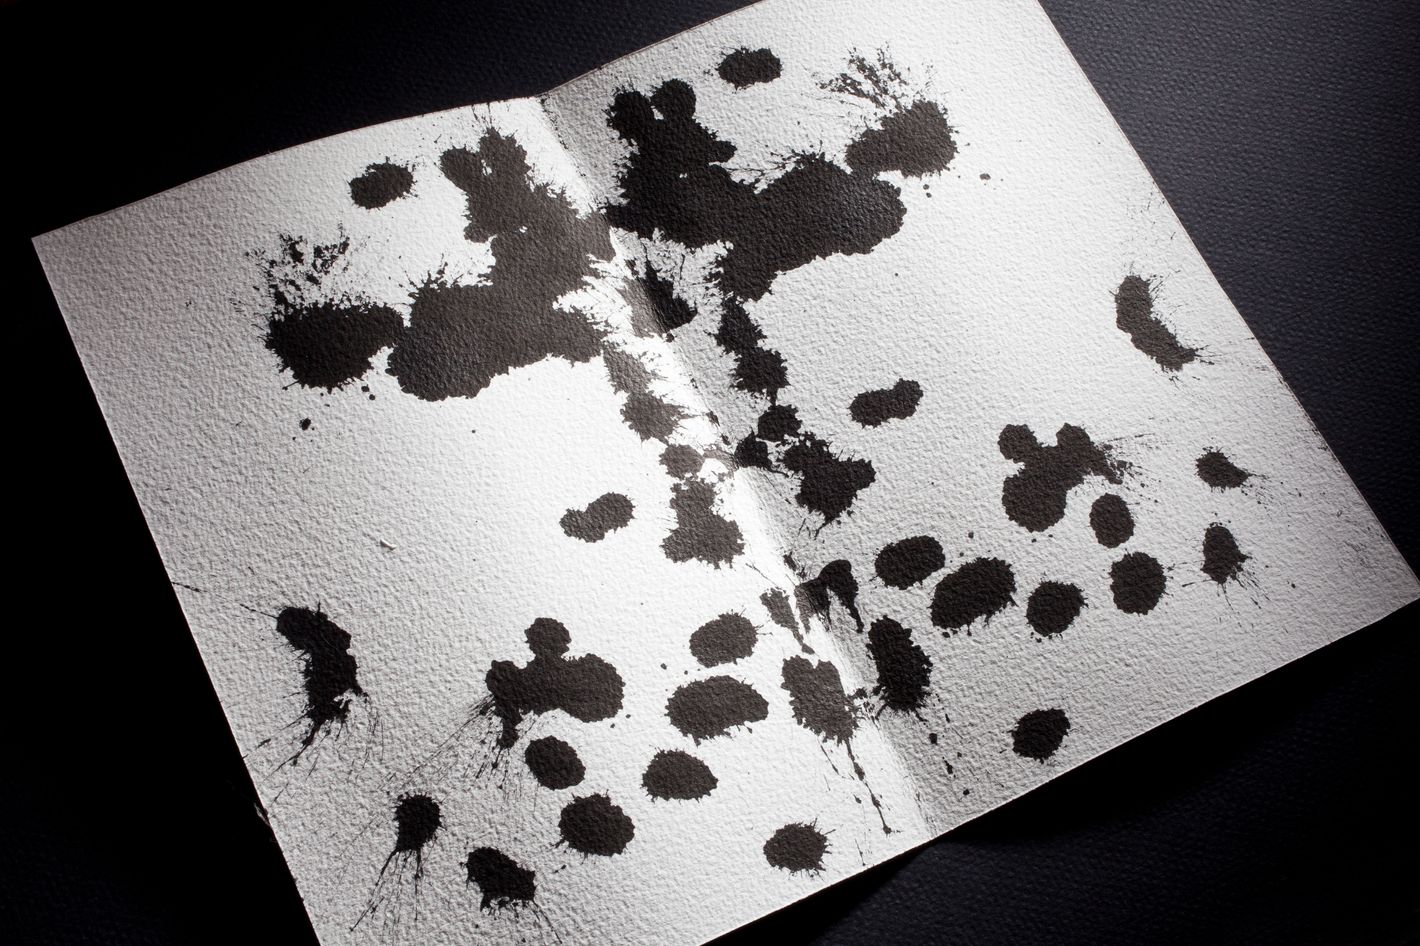 The Science of the Rorschach Blots